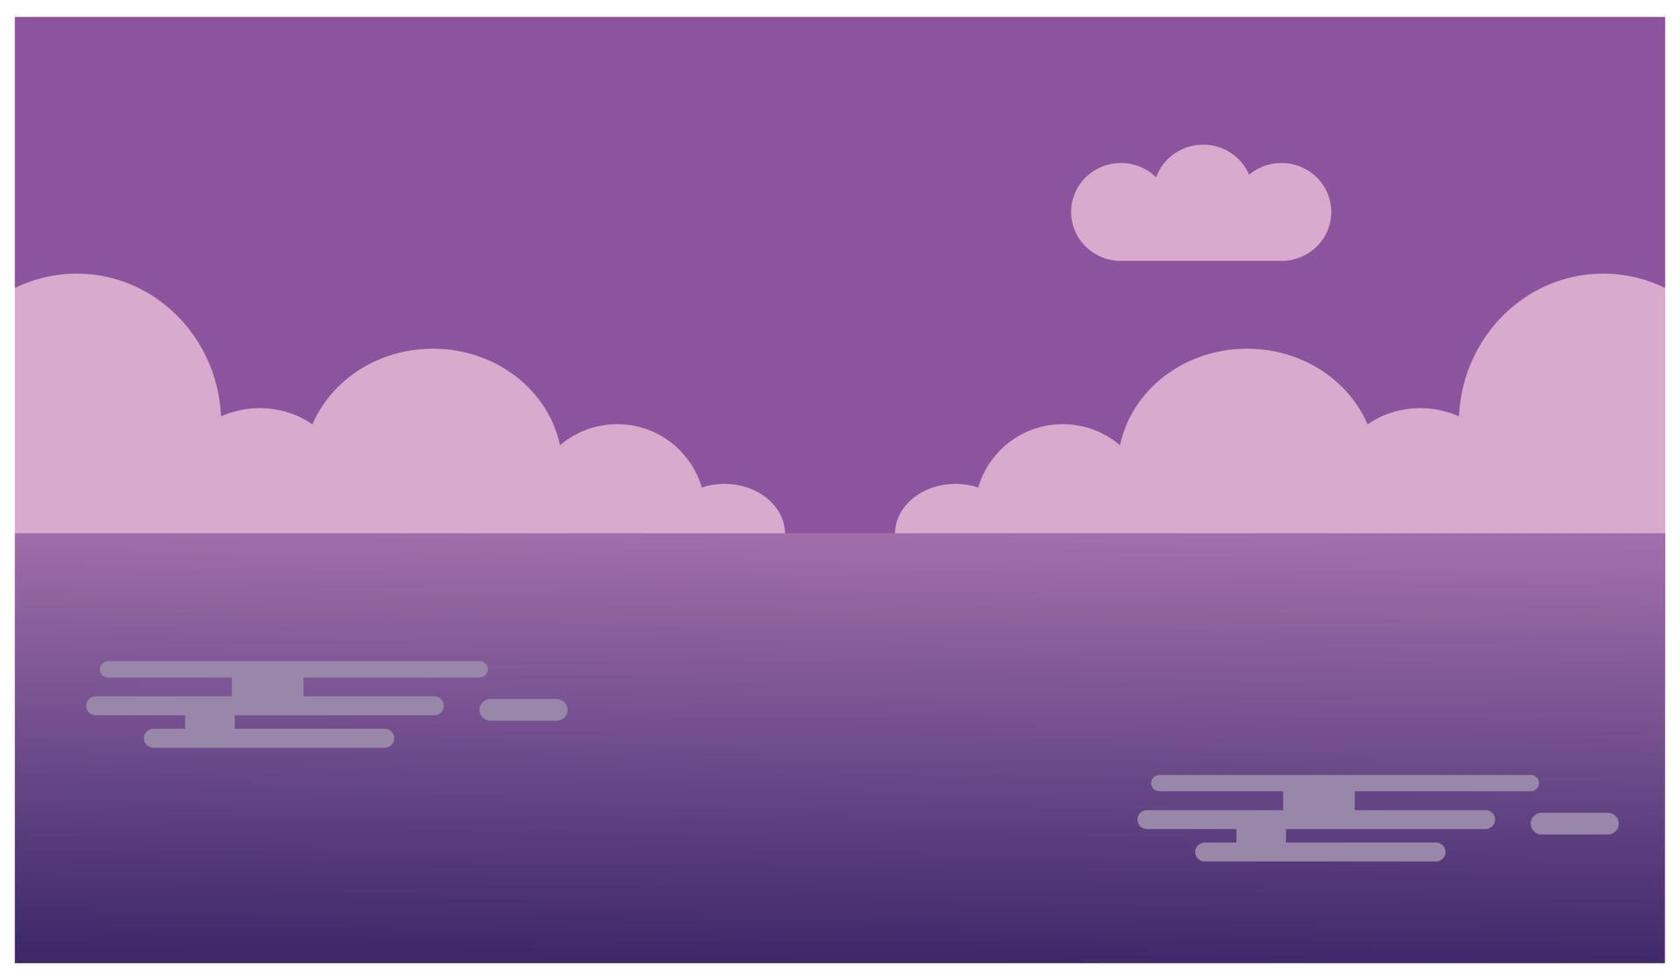 Illustration of a purple background with a lake and clouds in the sky. Landscape scenery above the water with serene clouds. vector